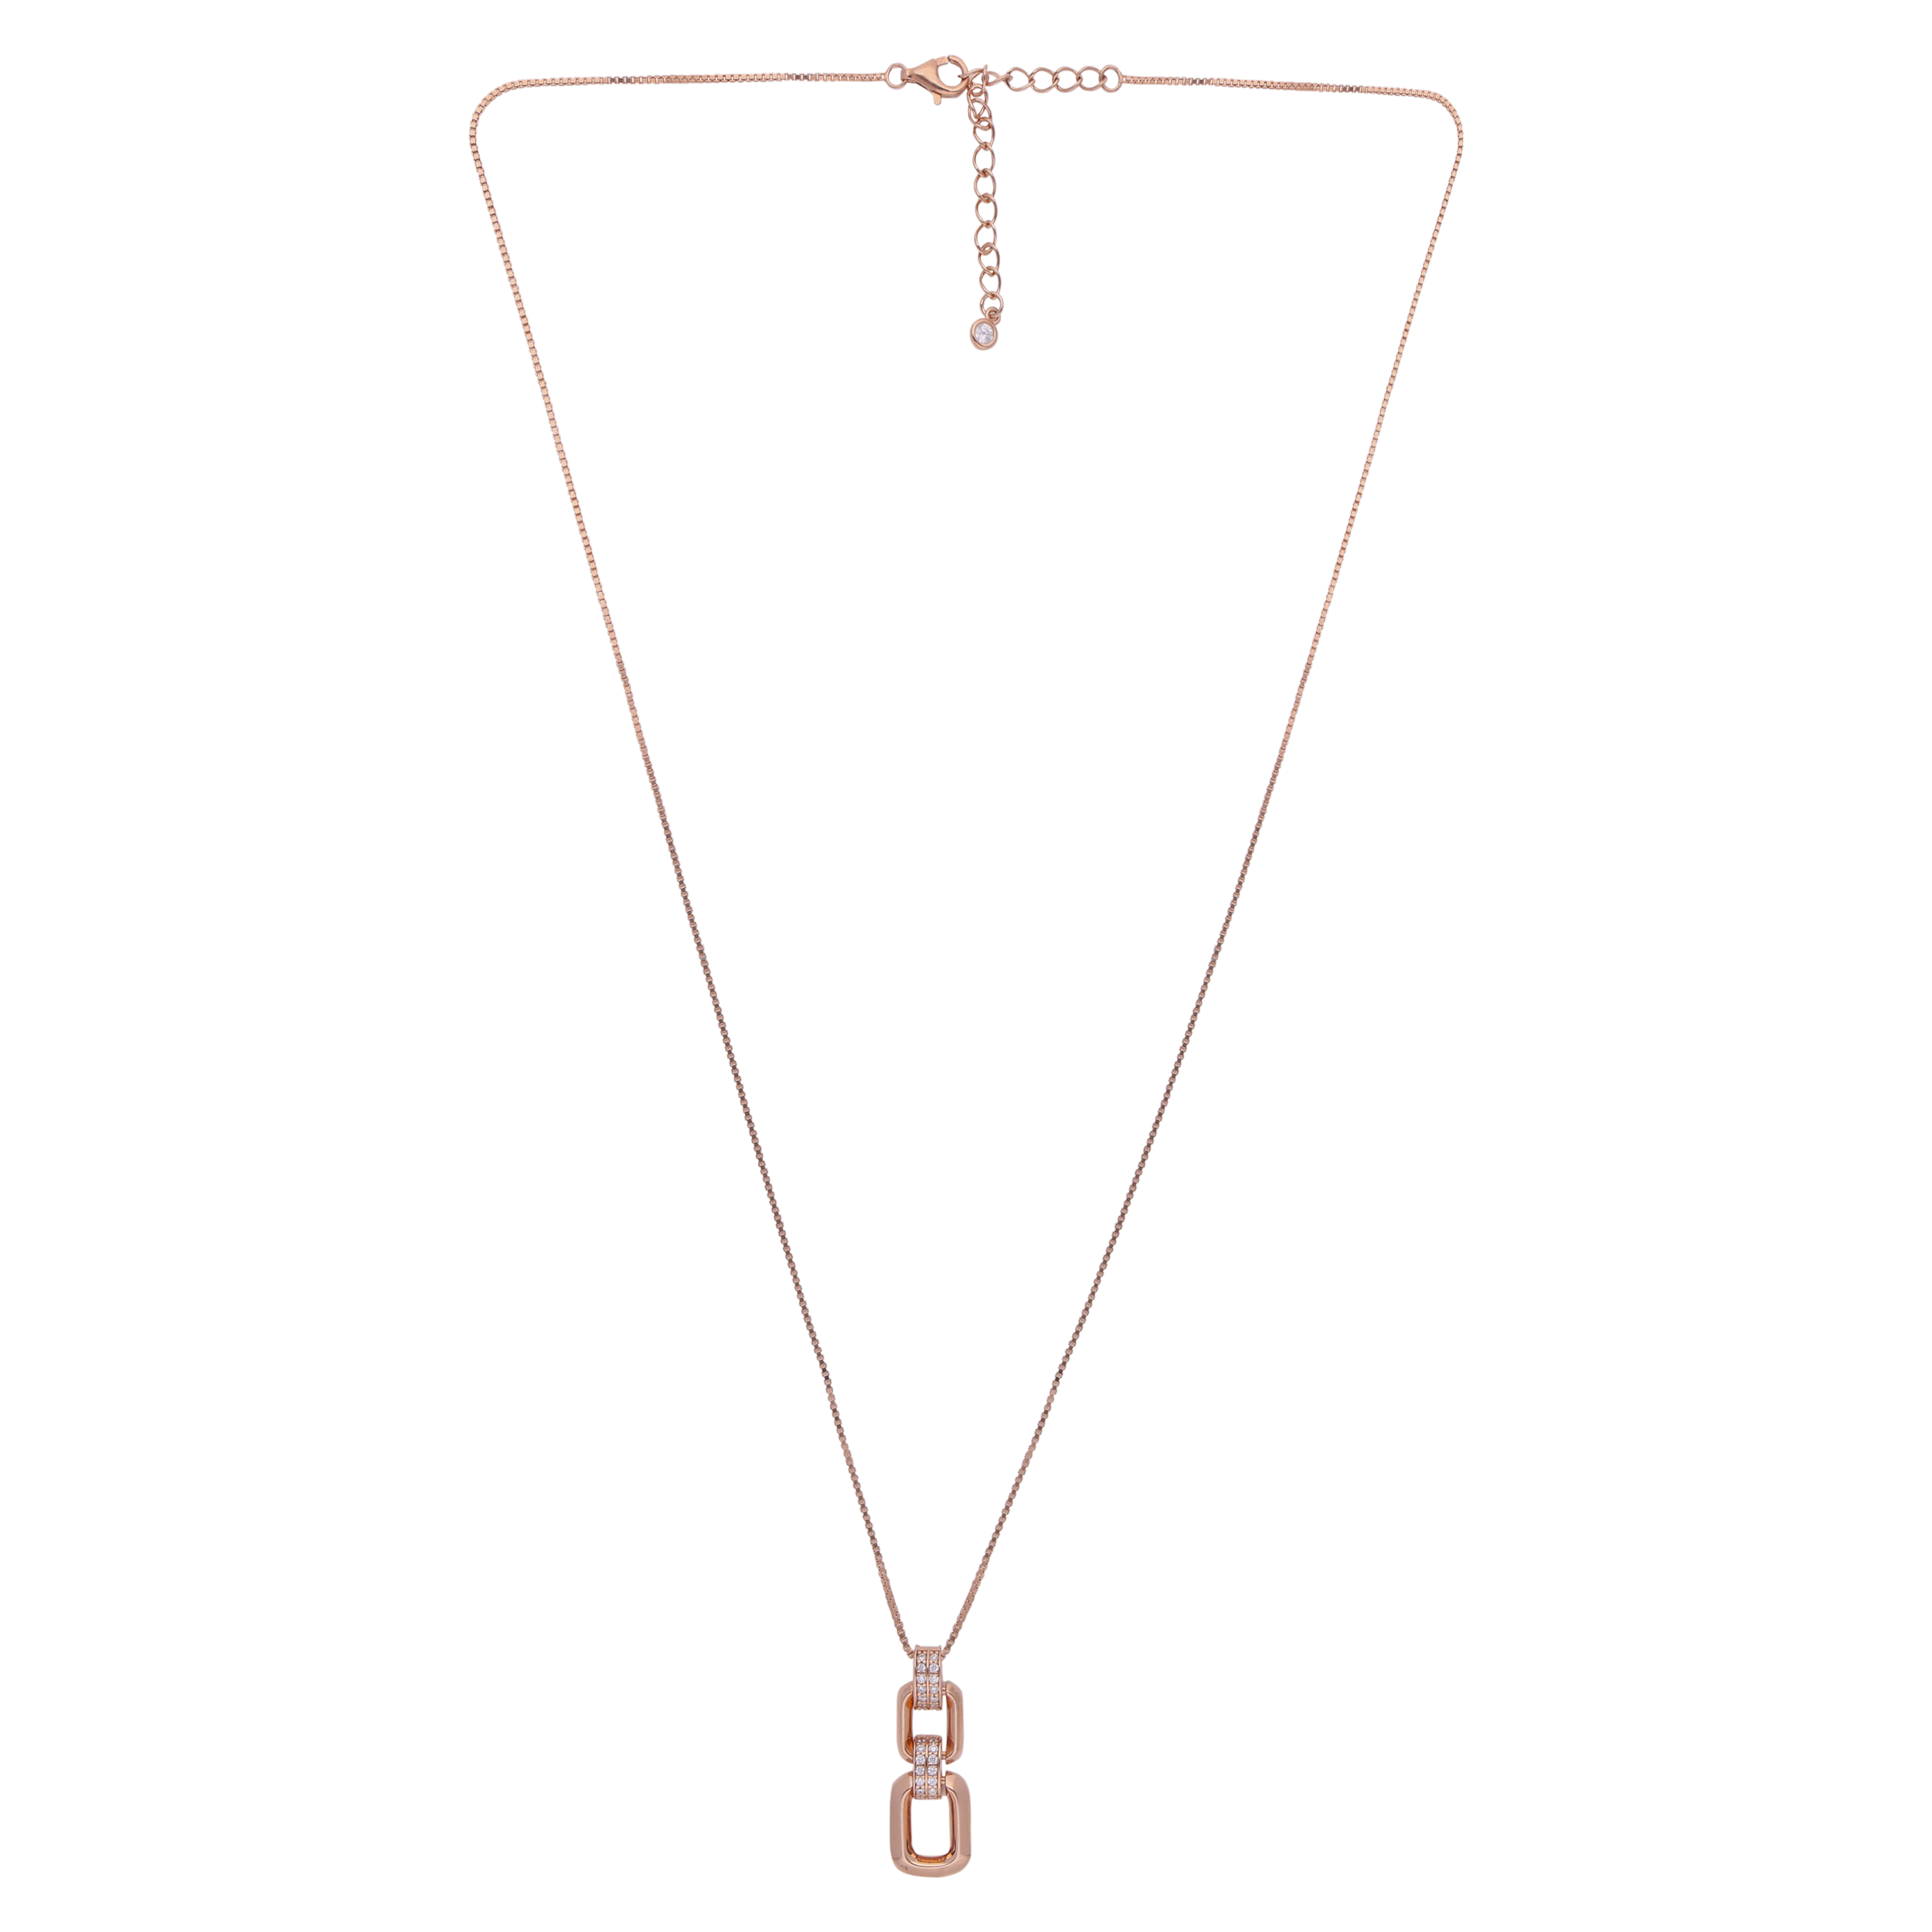 Radiant Rose Gold Interlinked Rectangle Pendant with Cubic Zirconia Accents | SKU : 0019889054, 0019889078